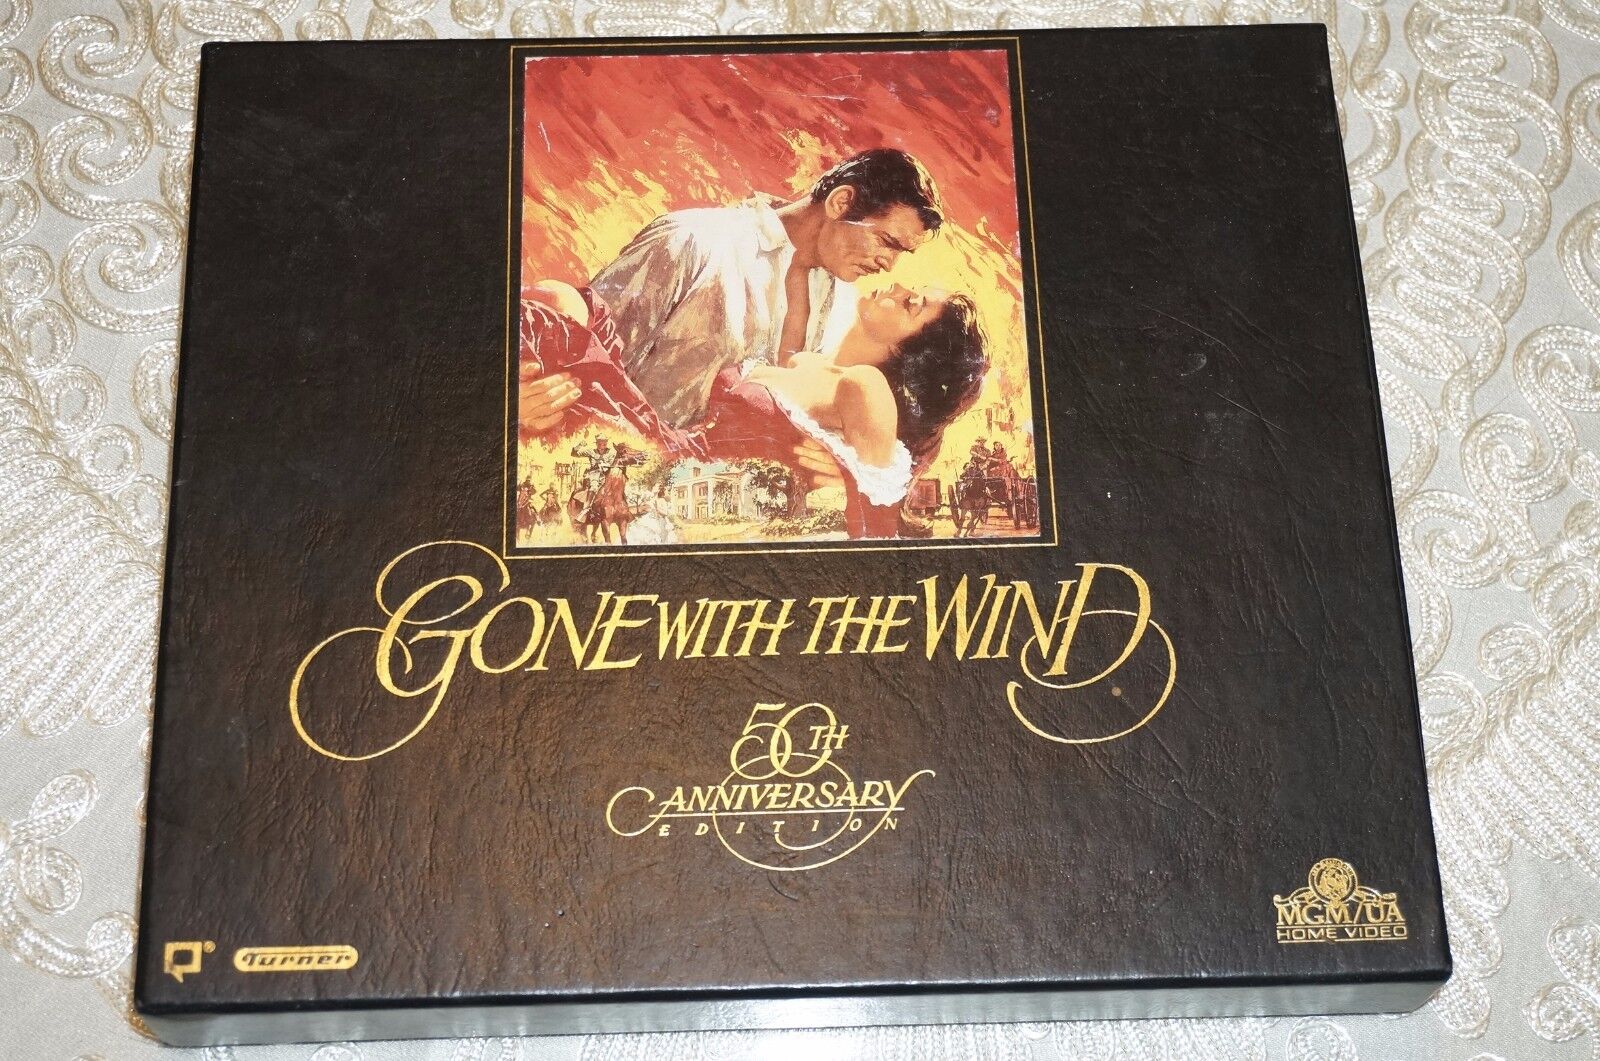 VINTAGE GONE WITH THE WIND TURNER MGM 2 VHS 50TH ANN SET IN CASE W/ CERTIFICATE